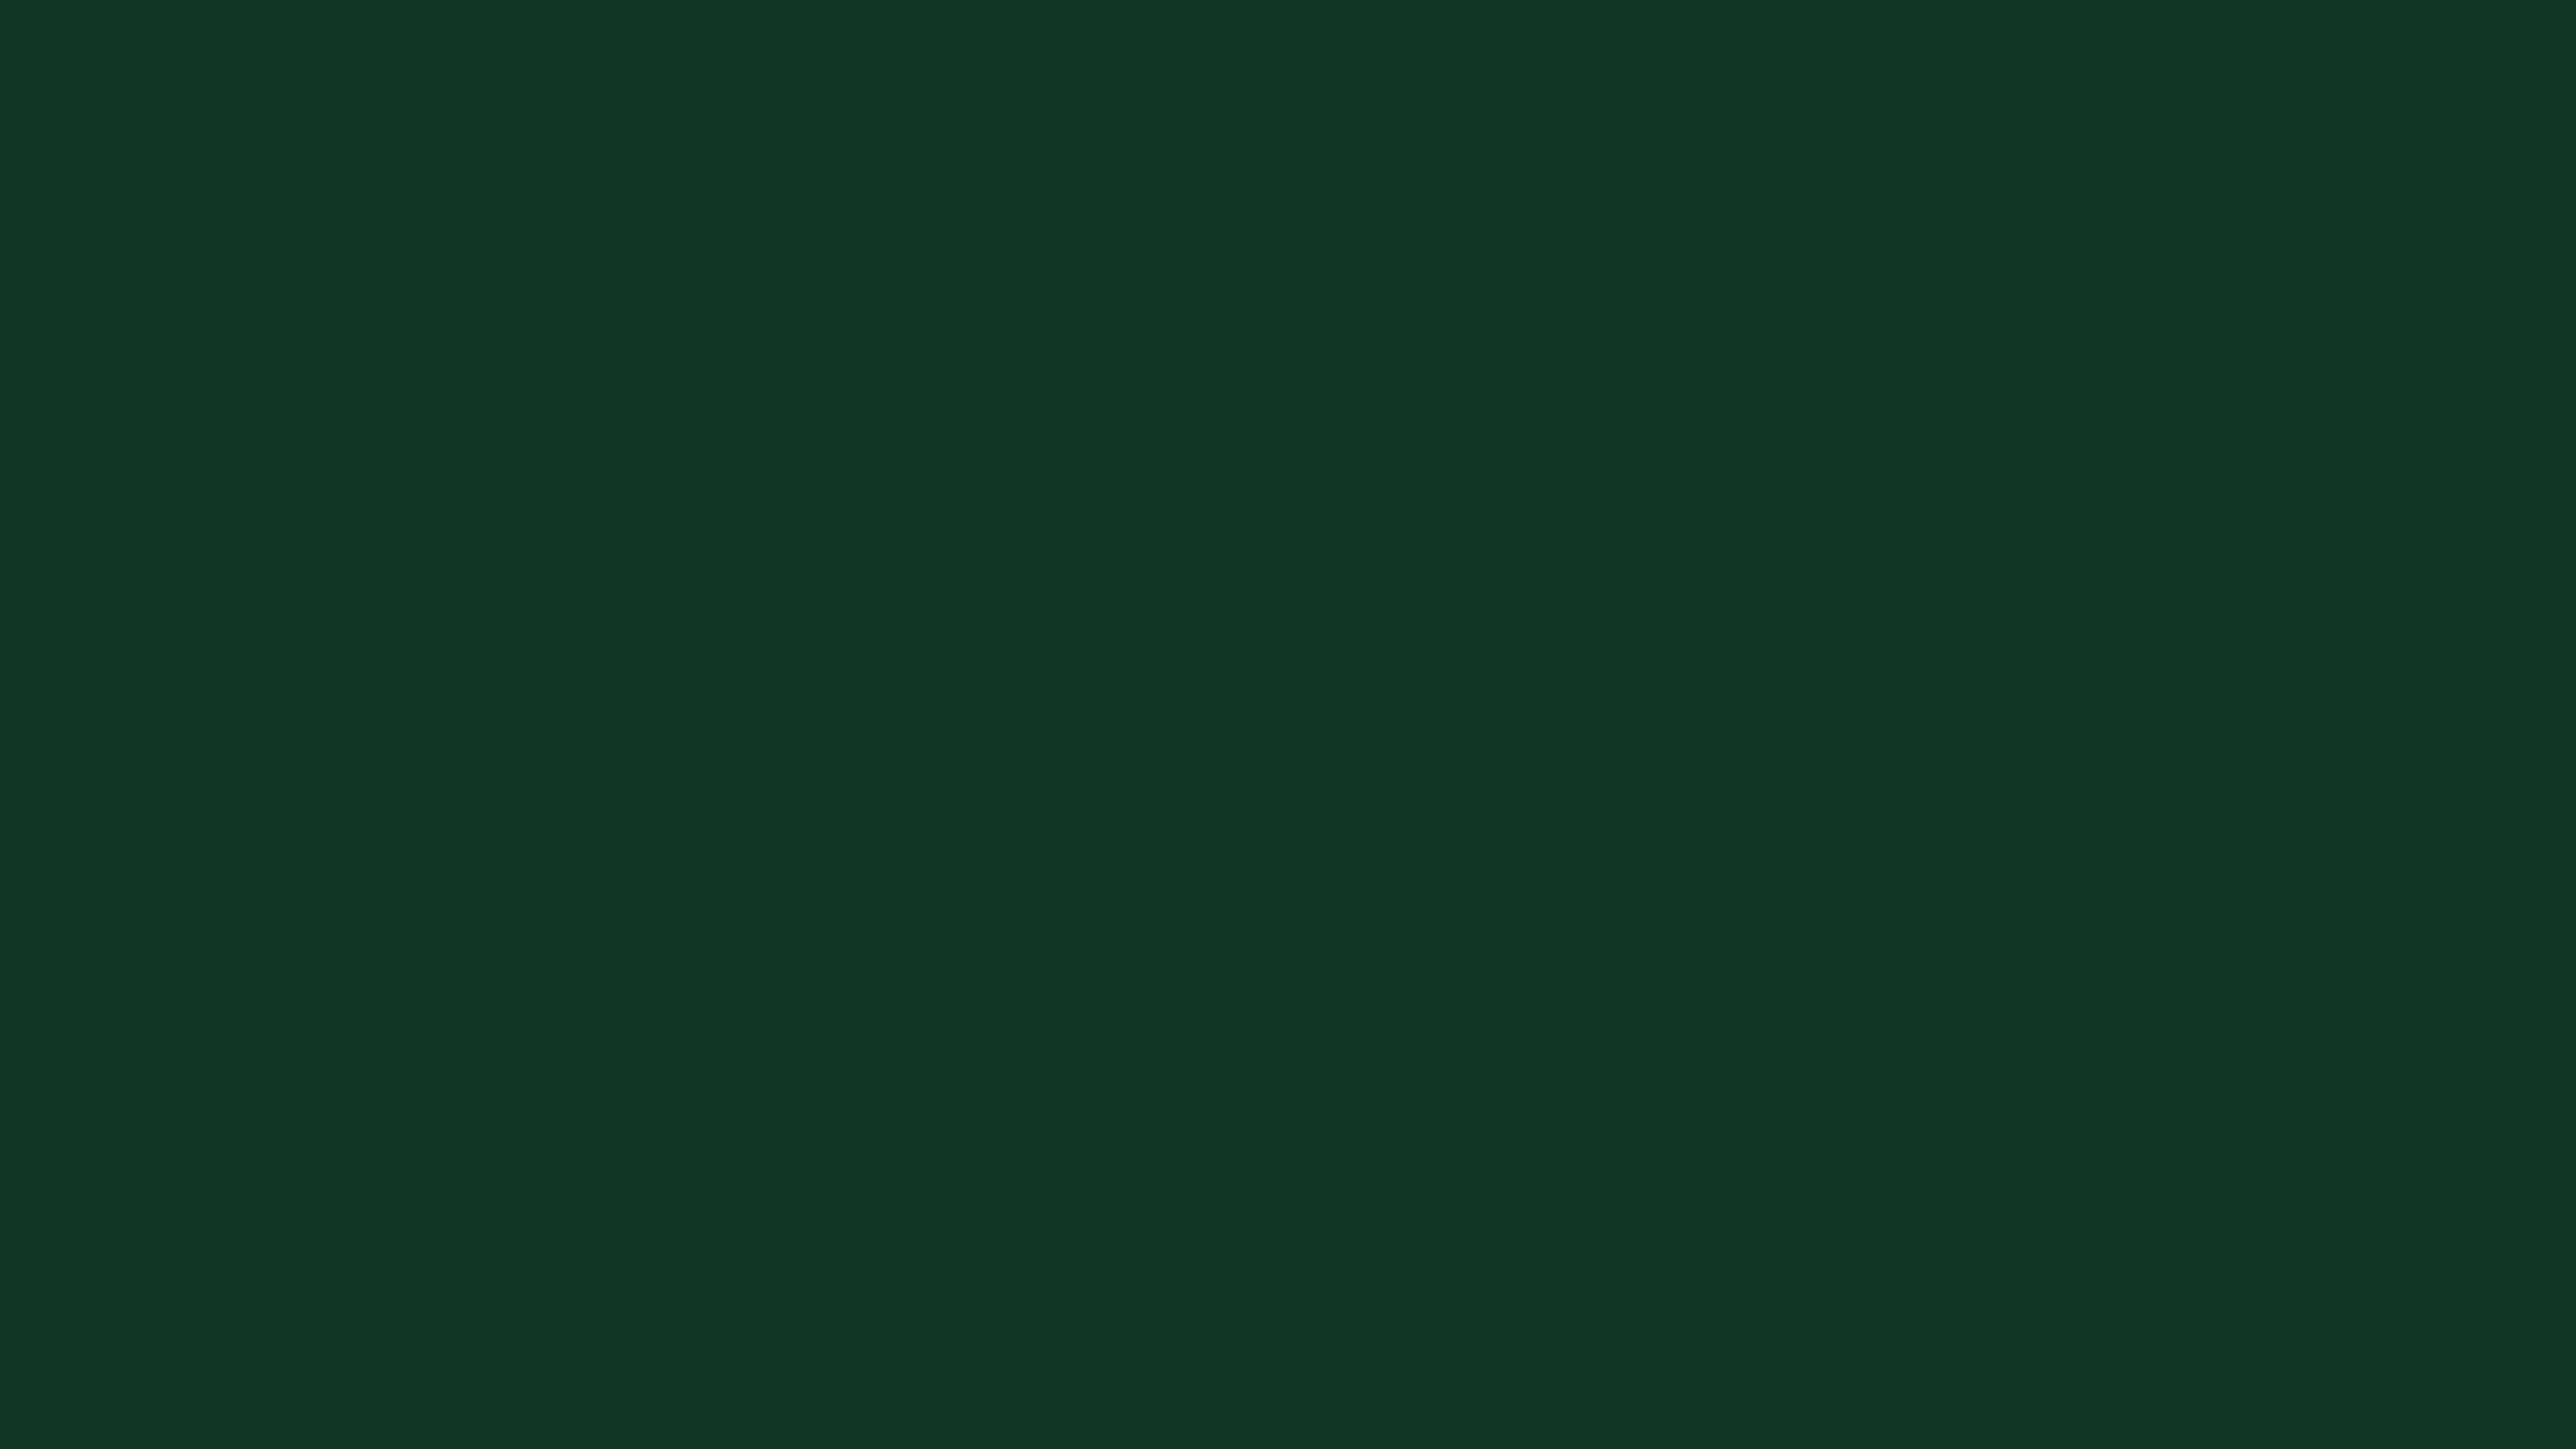 3840x2160 Phthalo Green Solid Color Background